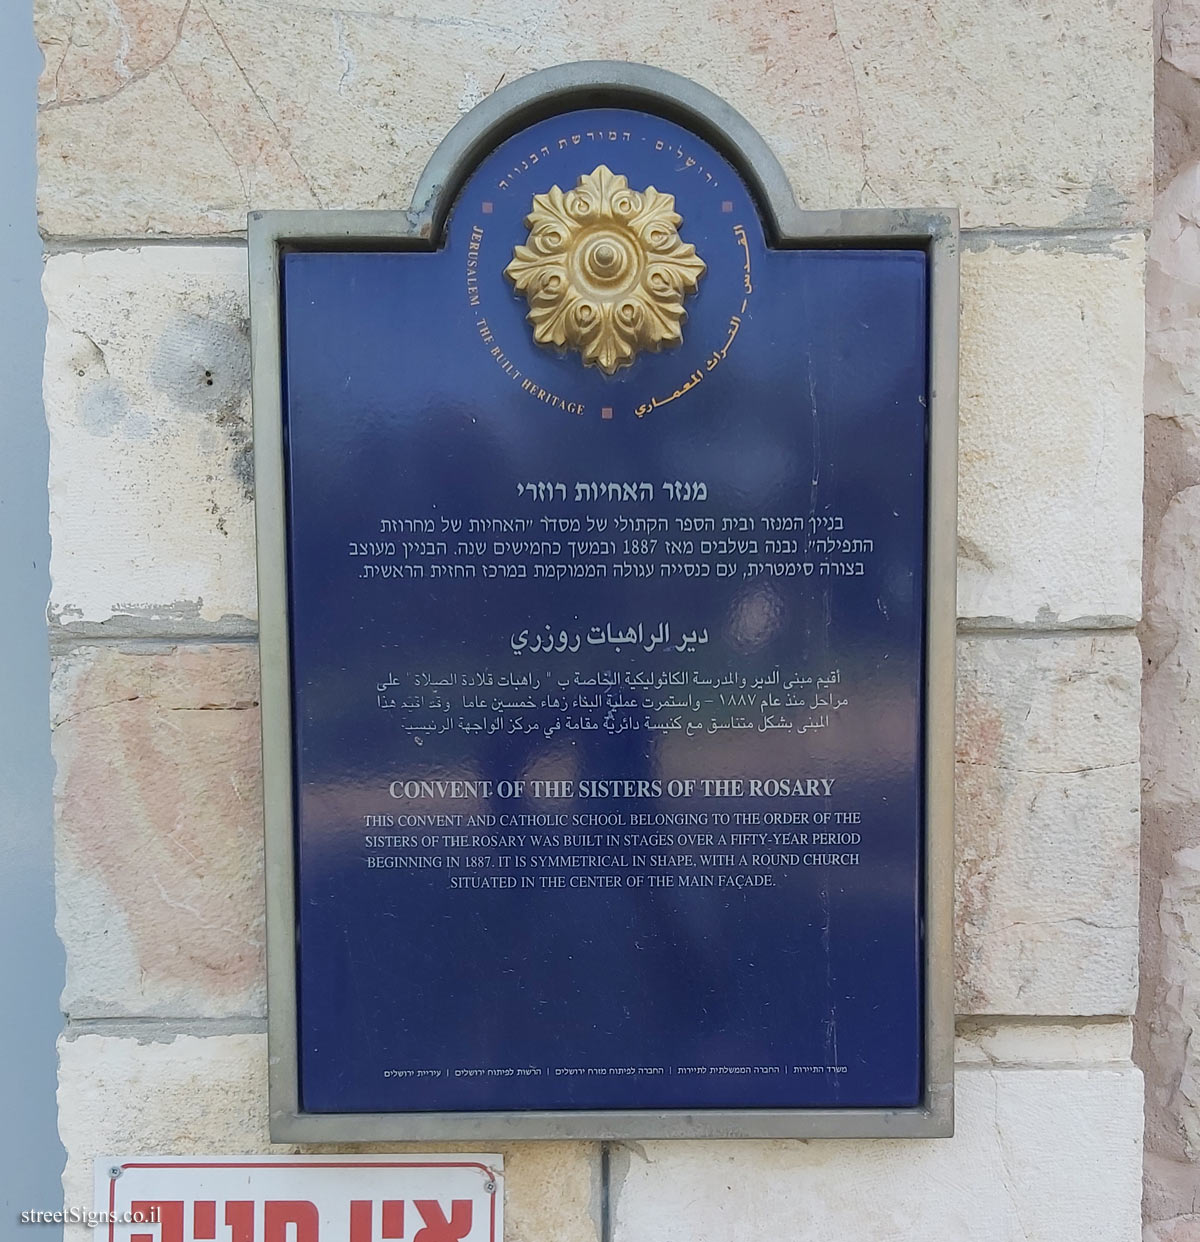 Jerusalem - The Built Heritage - Convent of the Sisters of the Rosary